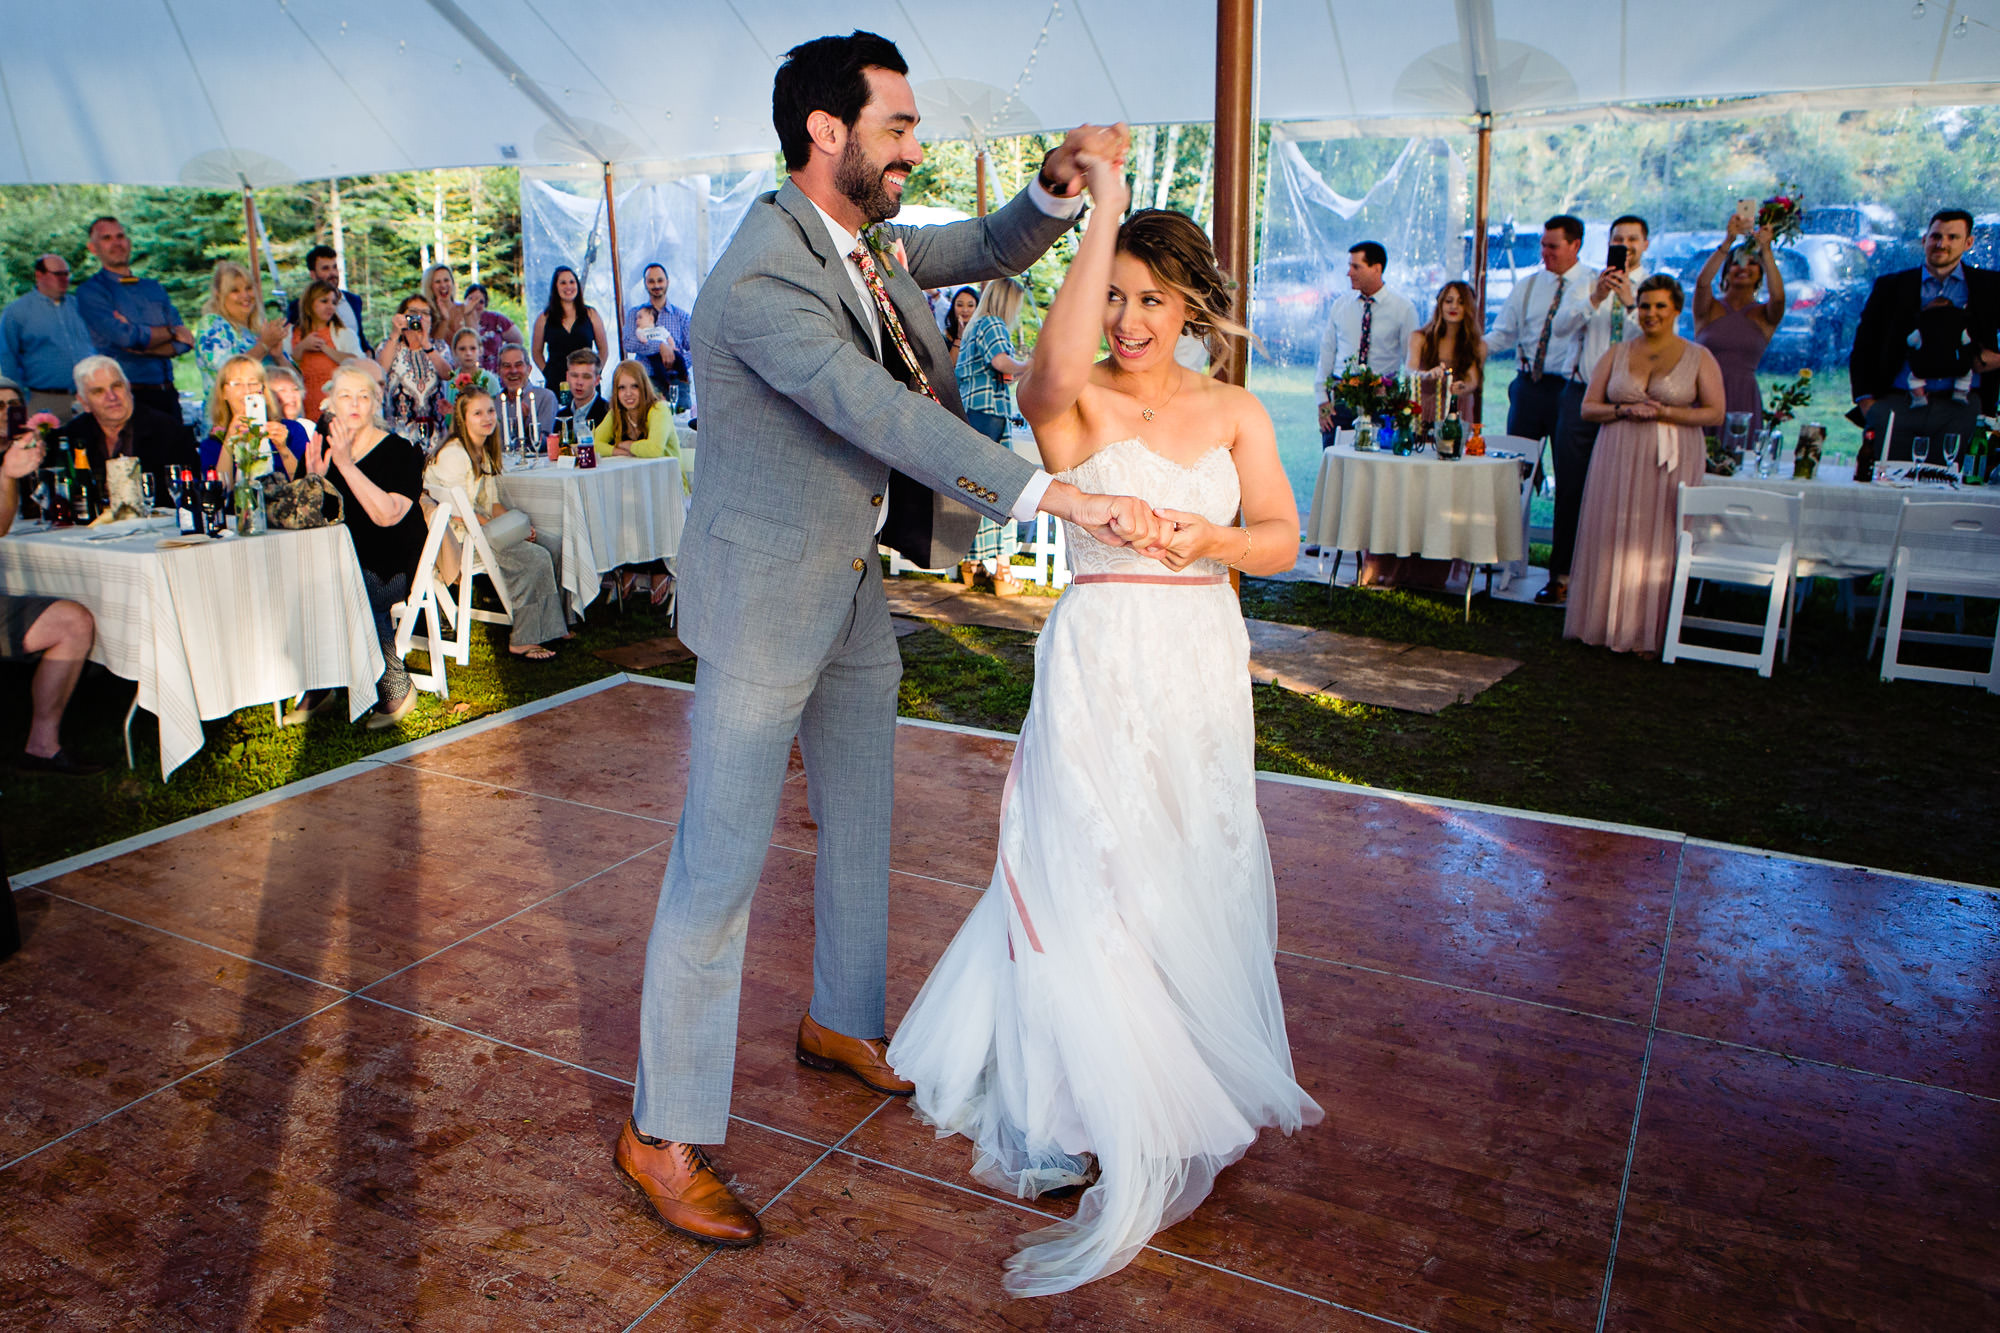 The bride and groom do a first dance at a midcoast Maine wedding